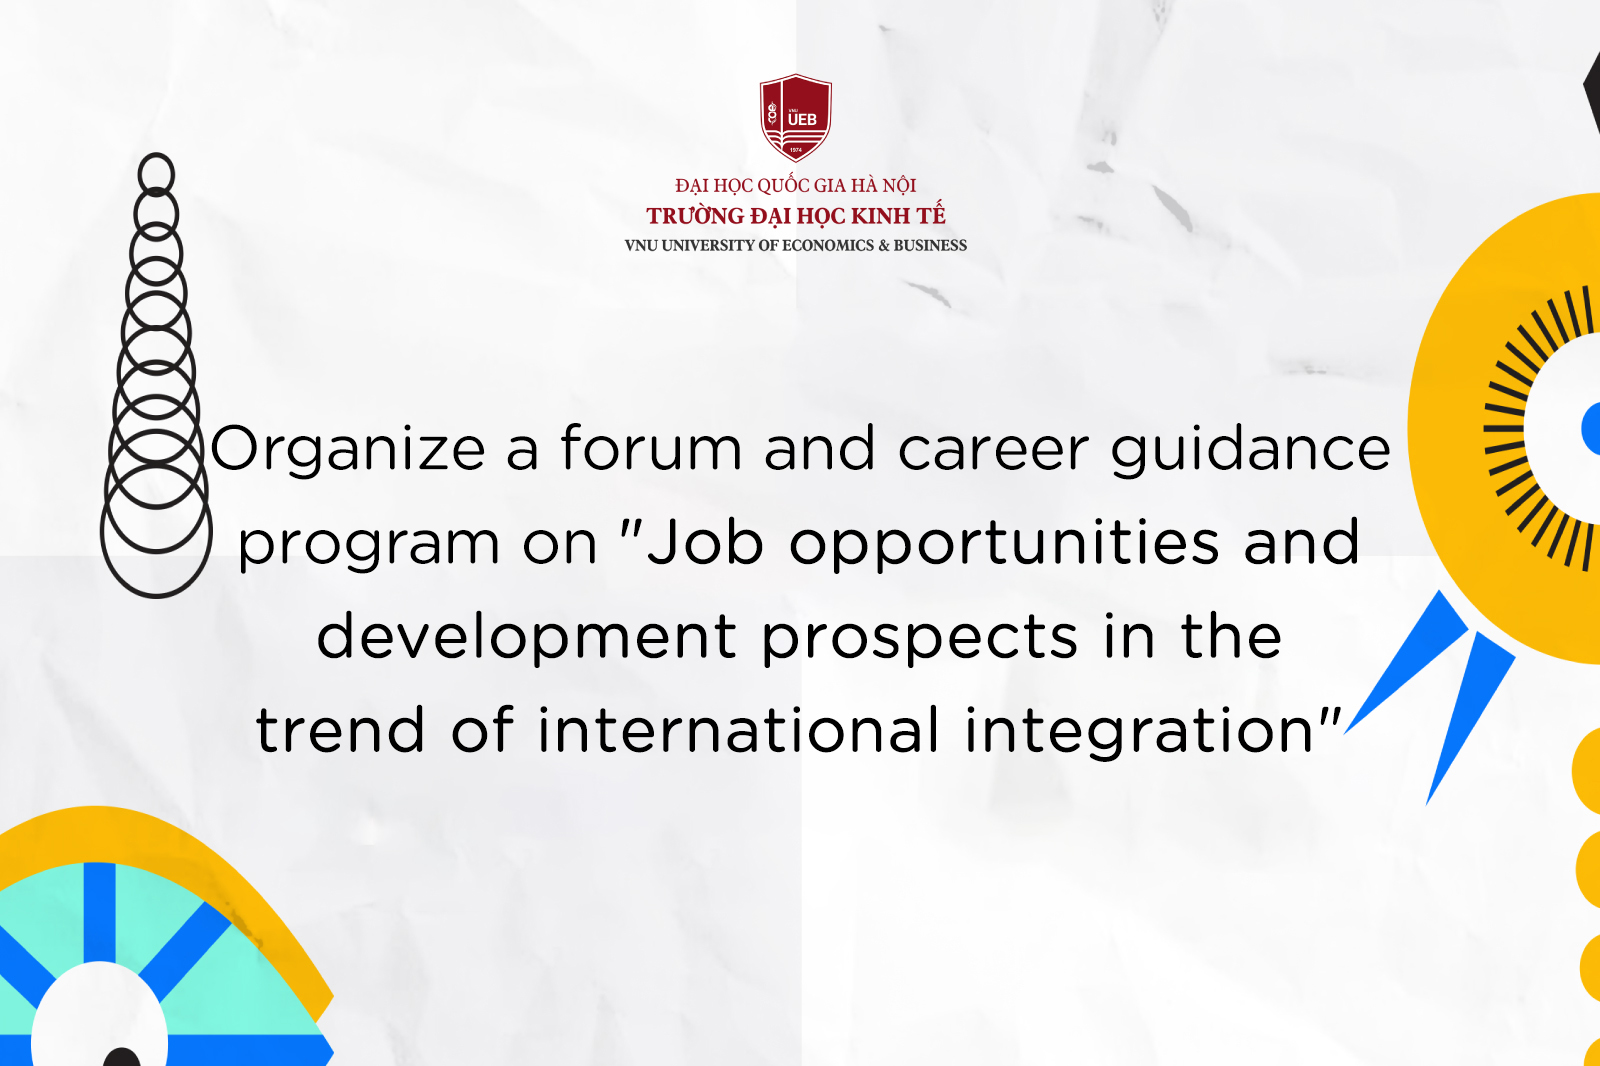 Organize a forum and career guidance program on "Job opportunities and development prospects in the trend of international integration"